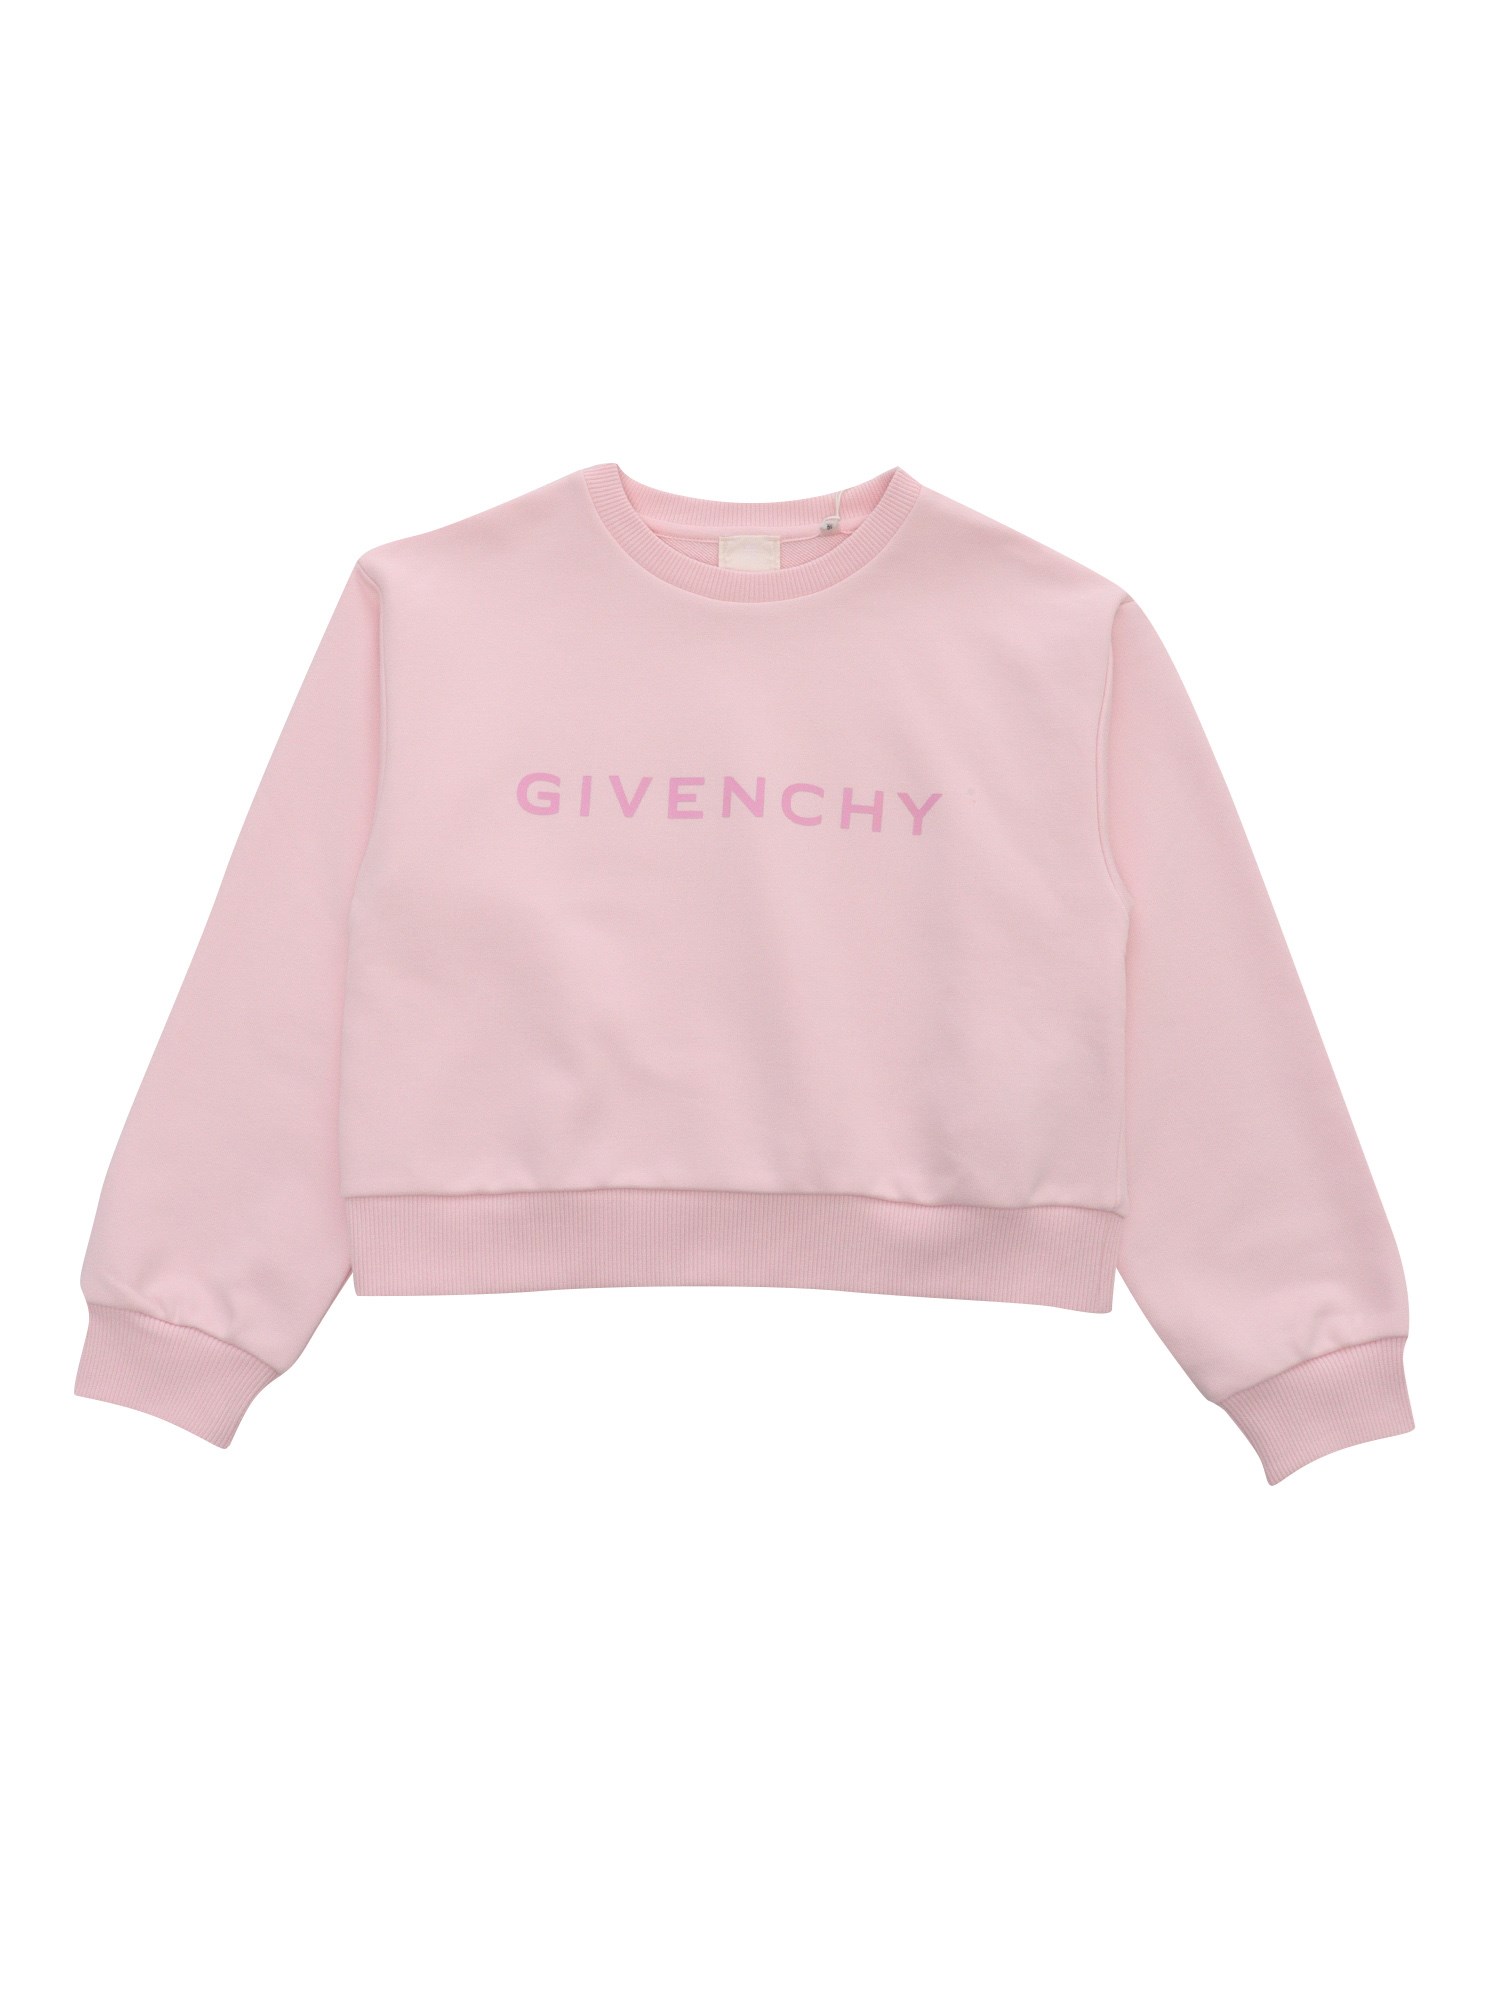 Givenchy Cropped Pink Sweatshirt